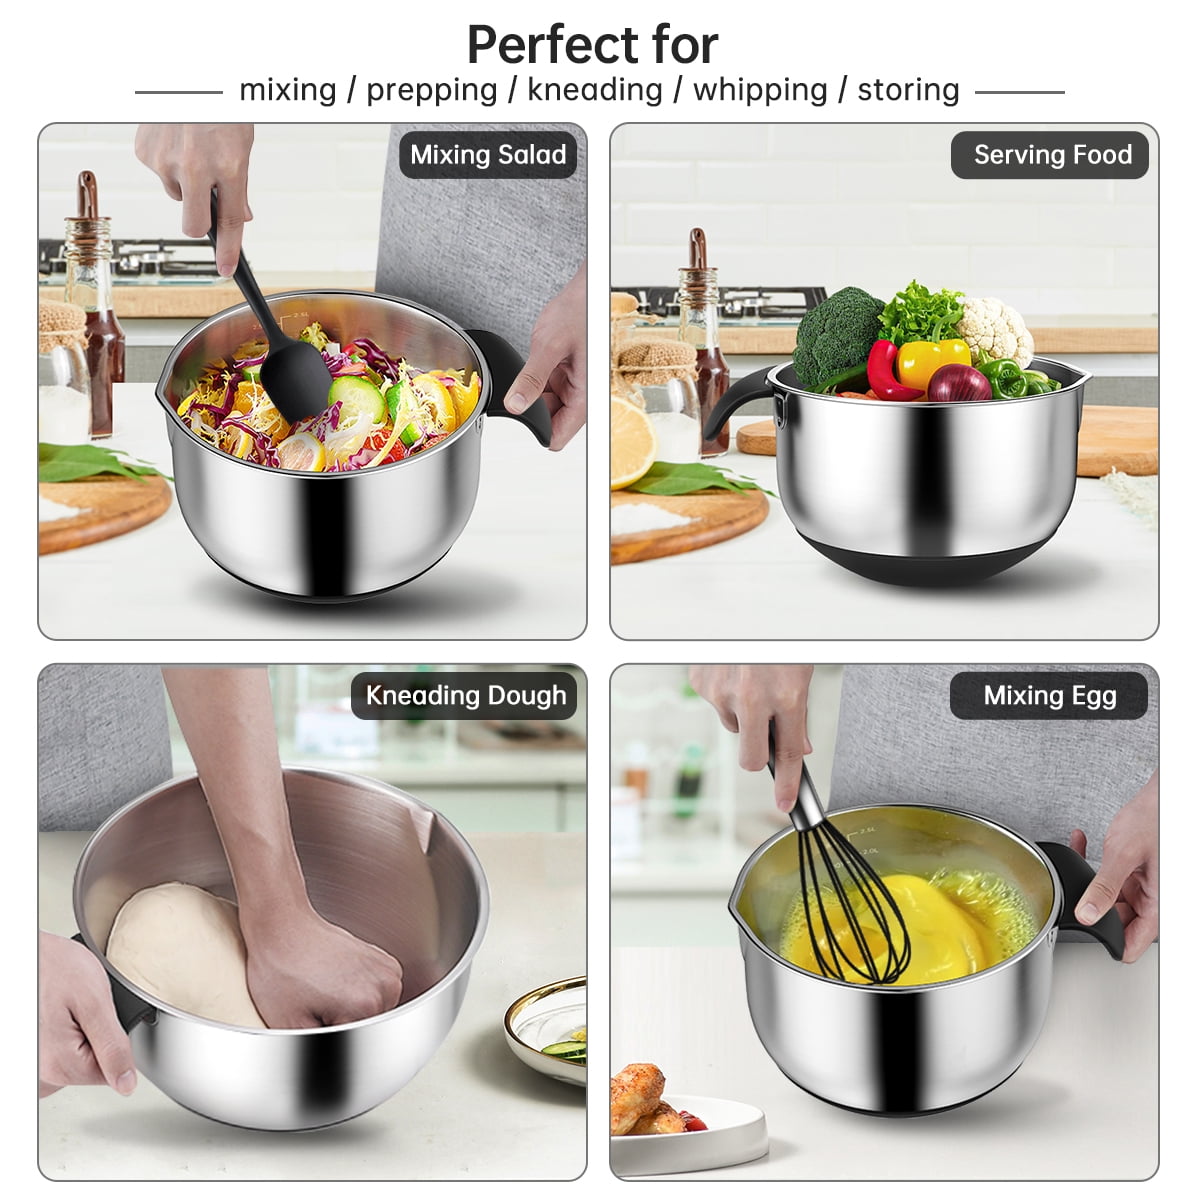 Lieonvis 5 Pcs Mixing Bowls with Lids - Deep Nesting Mixing Bowls for Kitchen Storage - Stainless Steel Large Mixing Bowl Set for Cooking Food Baking